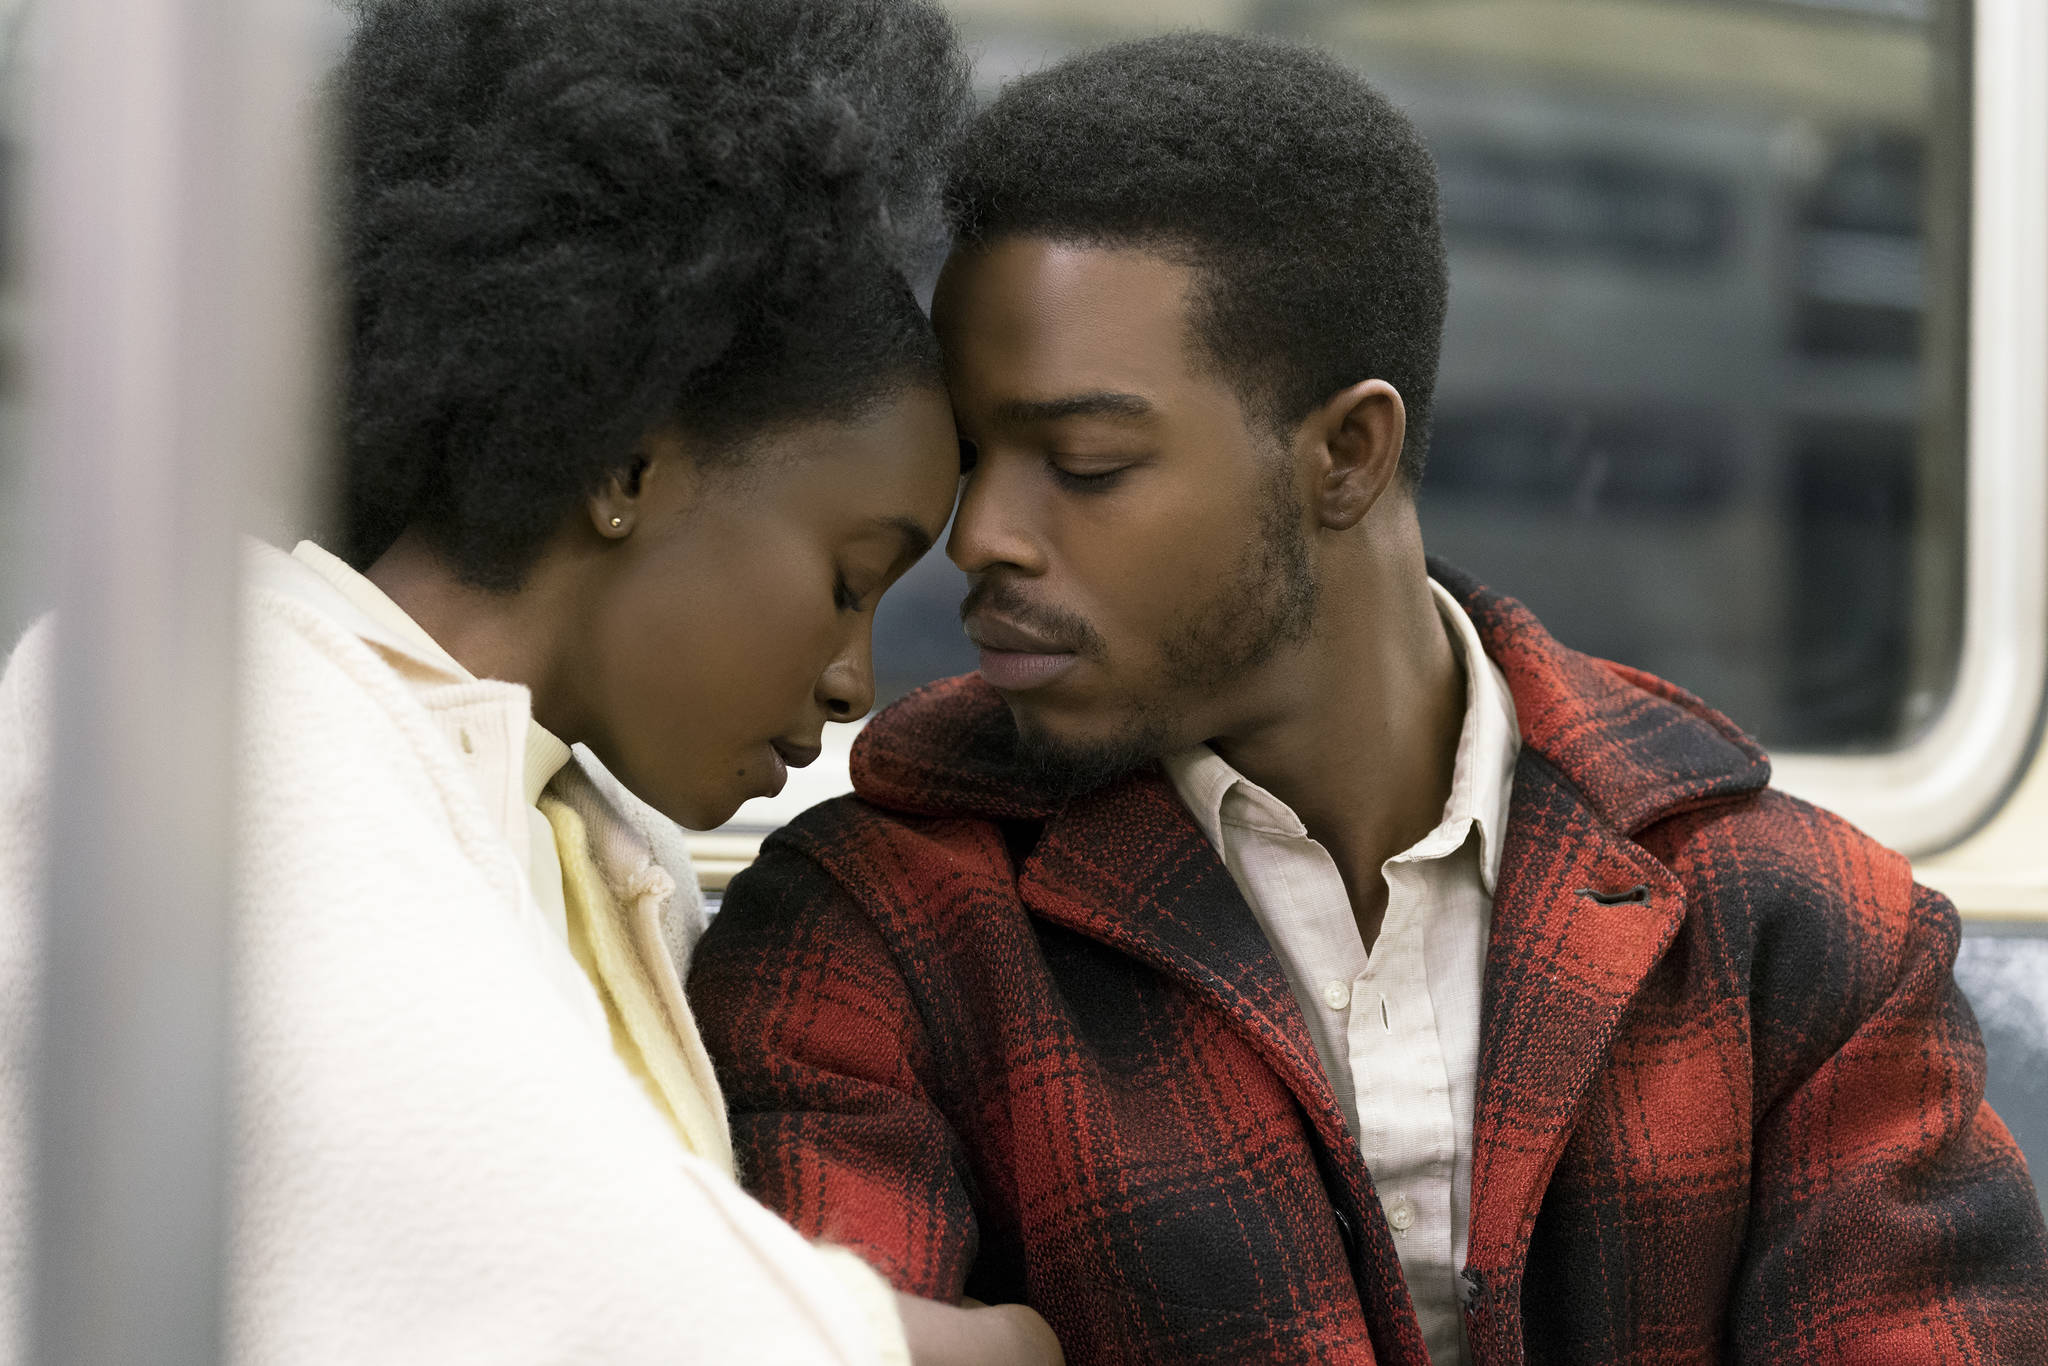 KiKi Layne (Tish) and Stephan James (Fonny) star in ‘If Beale Street Could Talk.’ Photo by Tatum Mangus/Annapurna Pictures